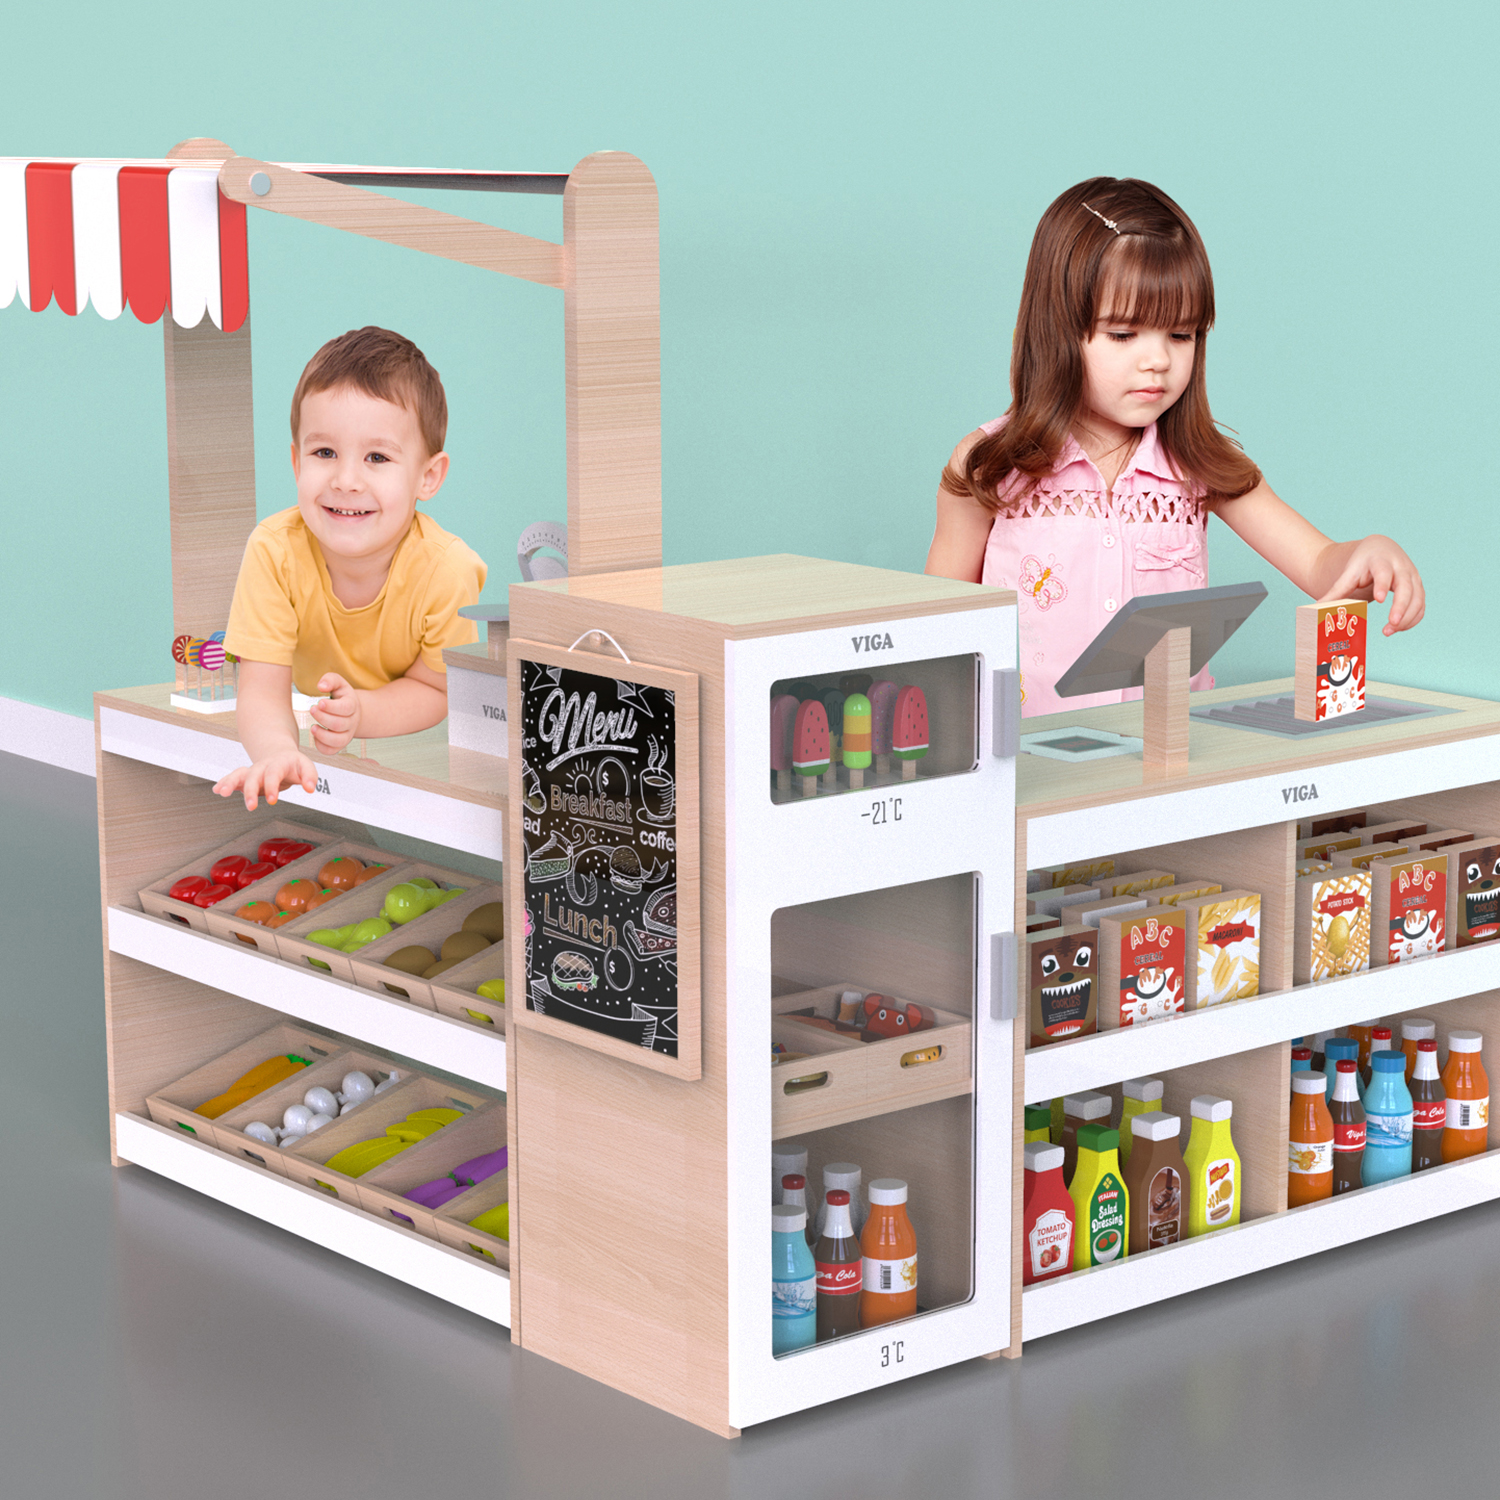 children playing in the supermarket which contains food display stand, refridgerator and fruit and vegetable stand